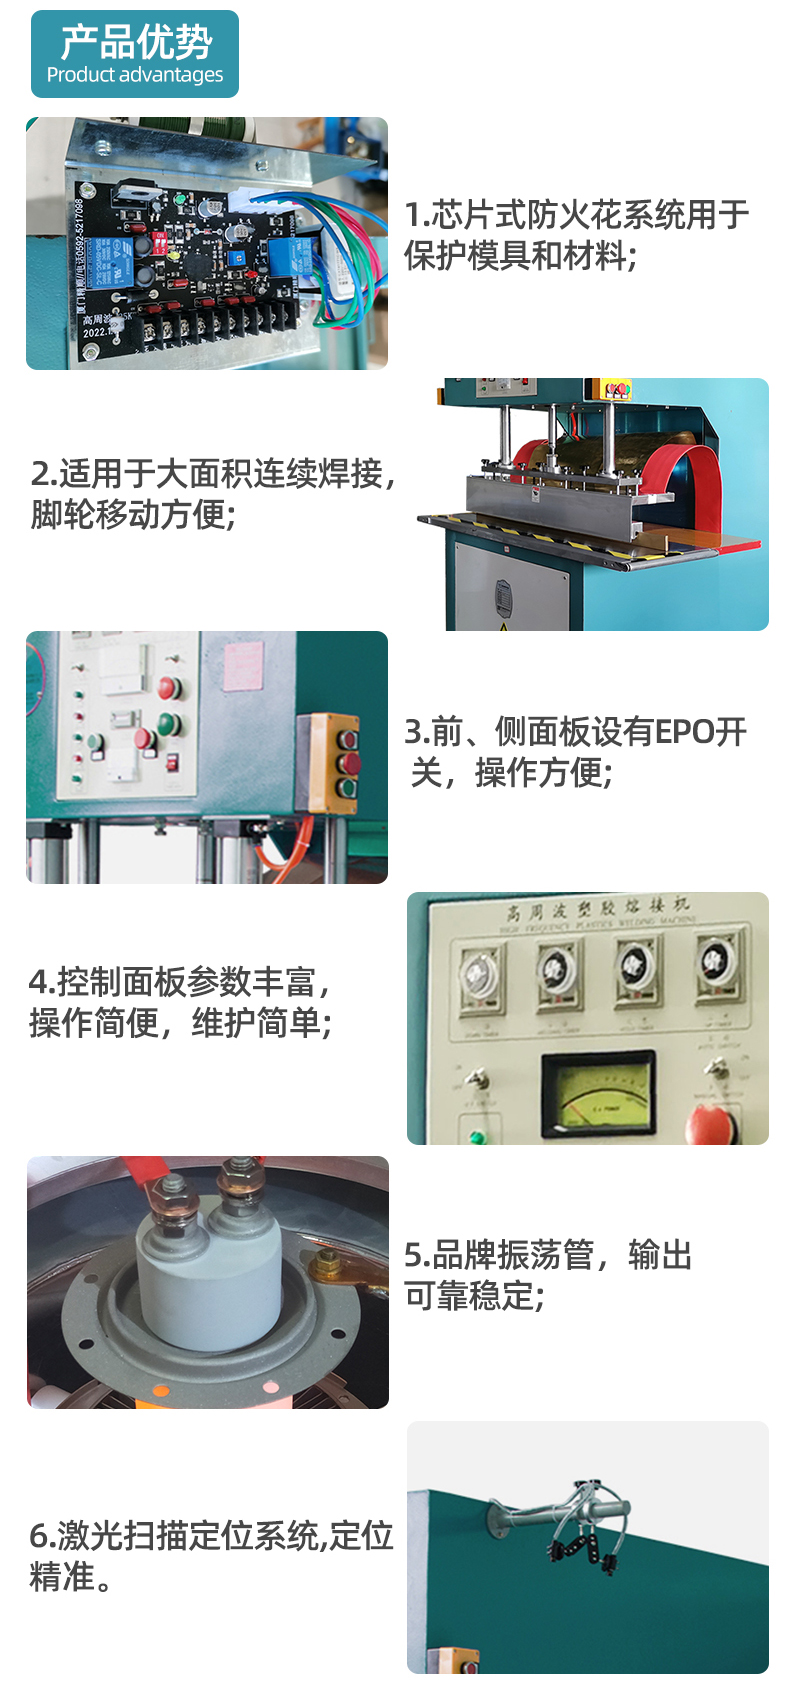 PVC membrane structure high frequency heat sealing machine, pool welding machine, canvas connecting machine, film welding machine